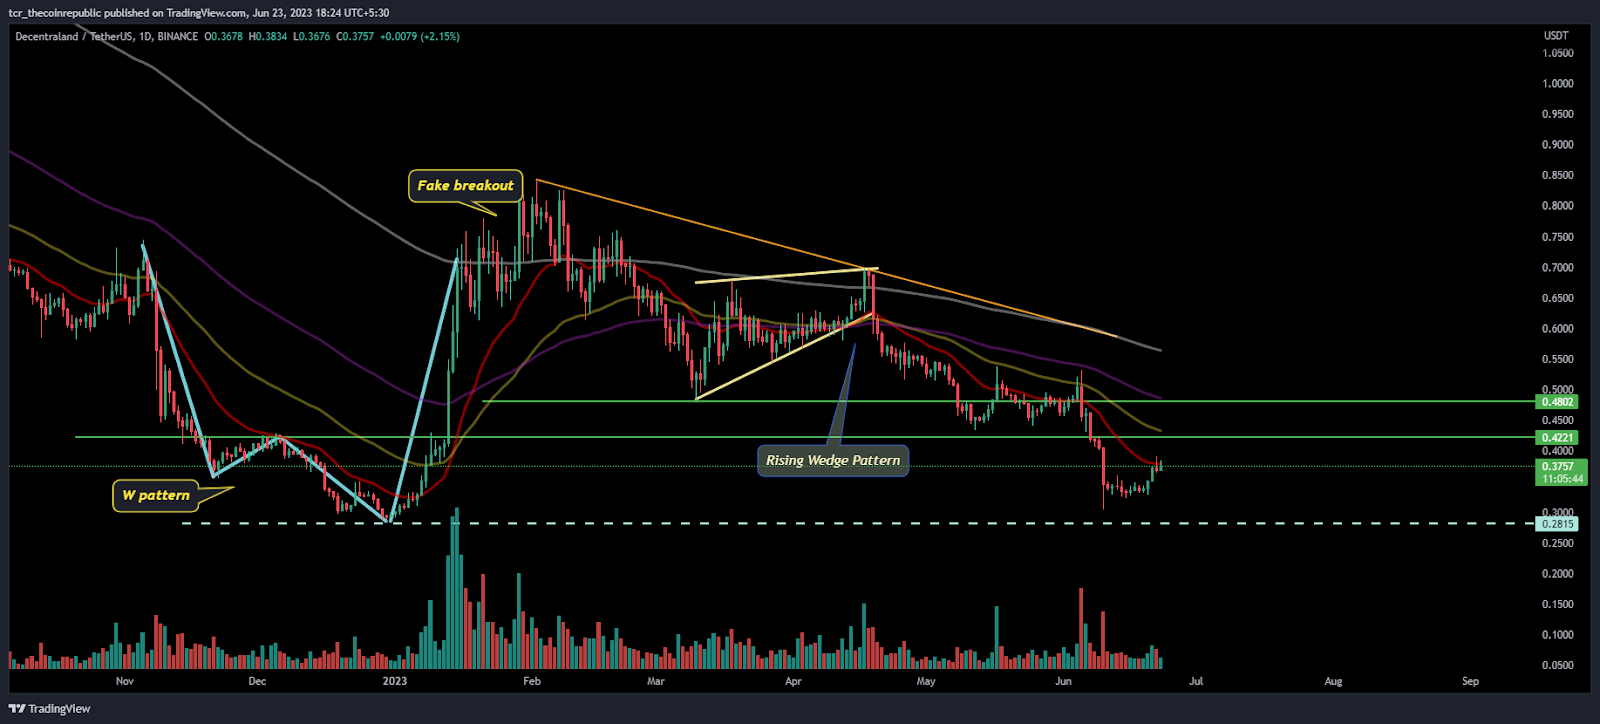 MANA Rebounded From the Demand Zone; Will this bounce continue?